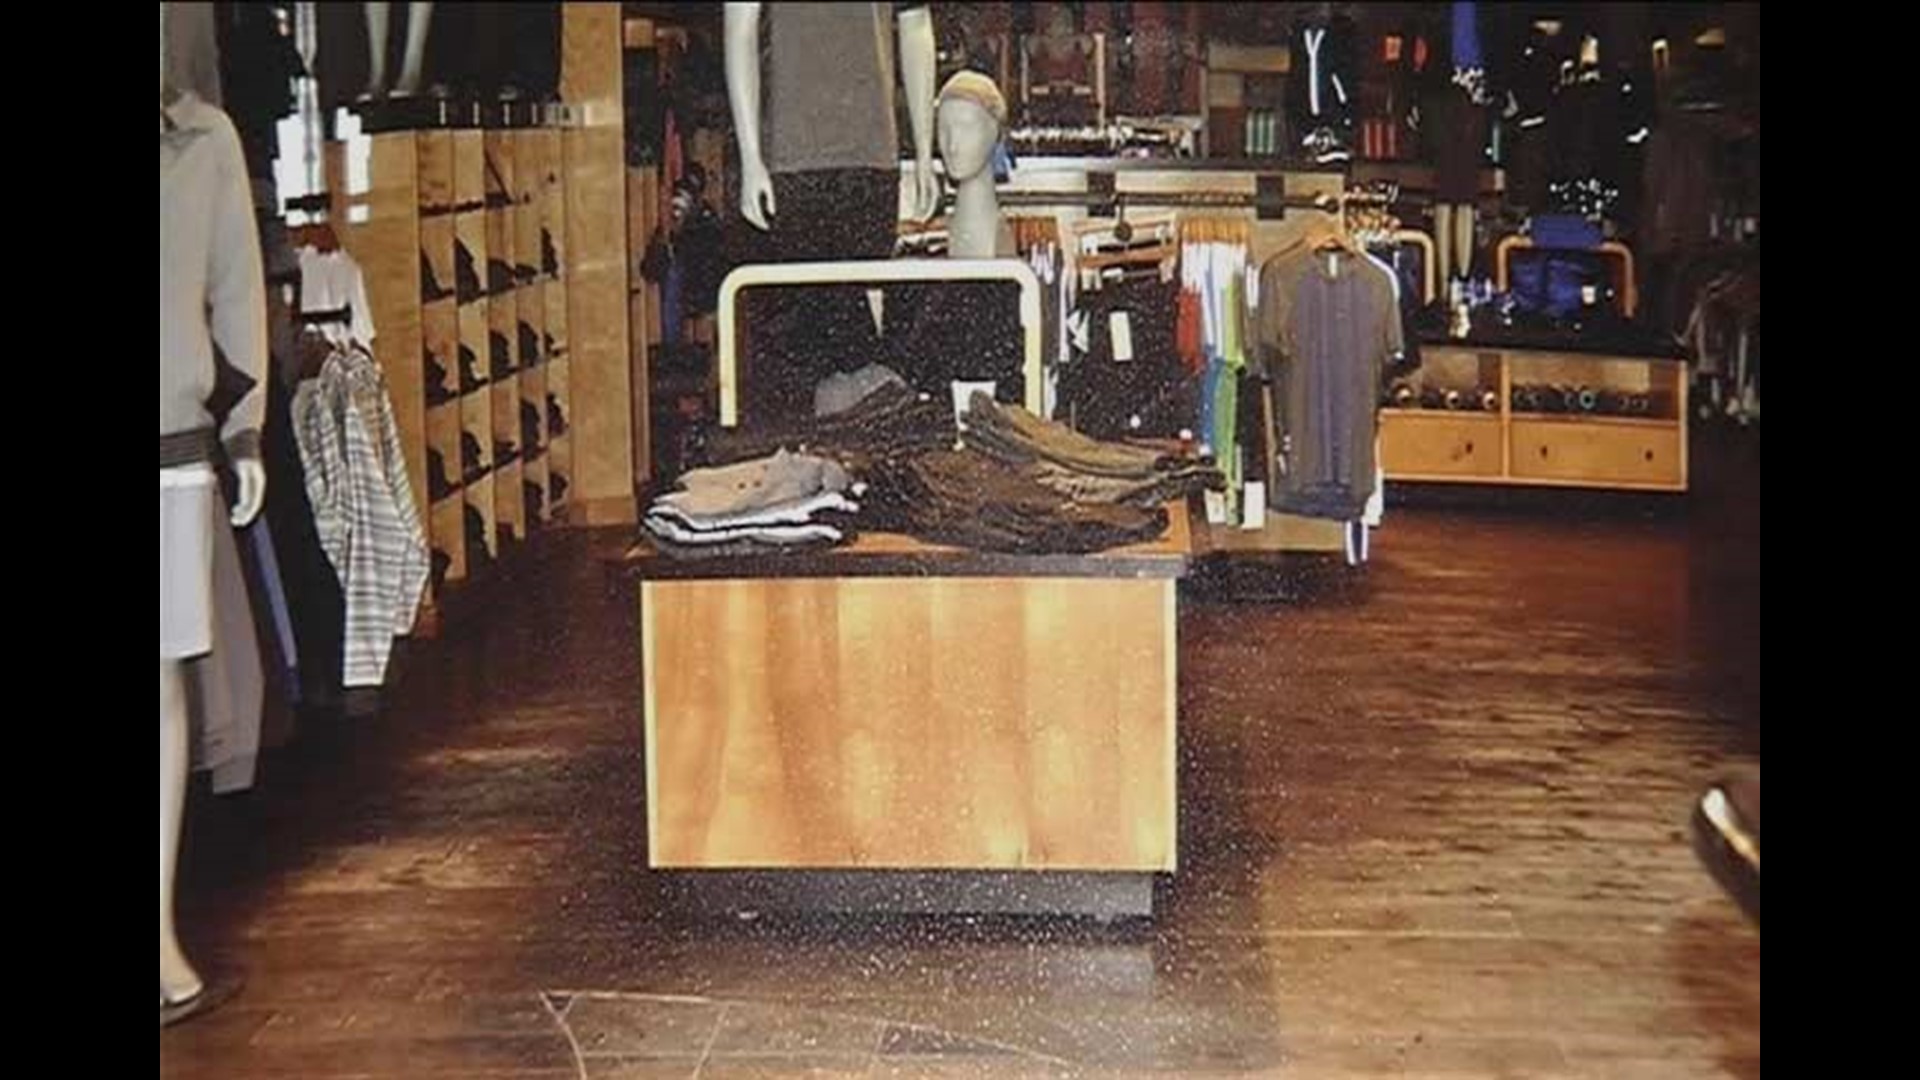 The Lululemon murder occurred on 2011, at a Lululemon store, when Brittany  Norwood, a store employee, murdered her coworker Jayna Murray. Murray  sustained 331 injuries from five weapons including a hammer, box